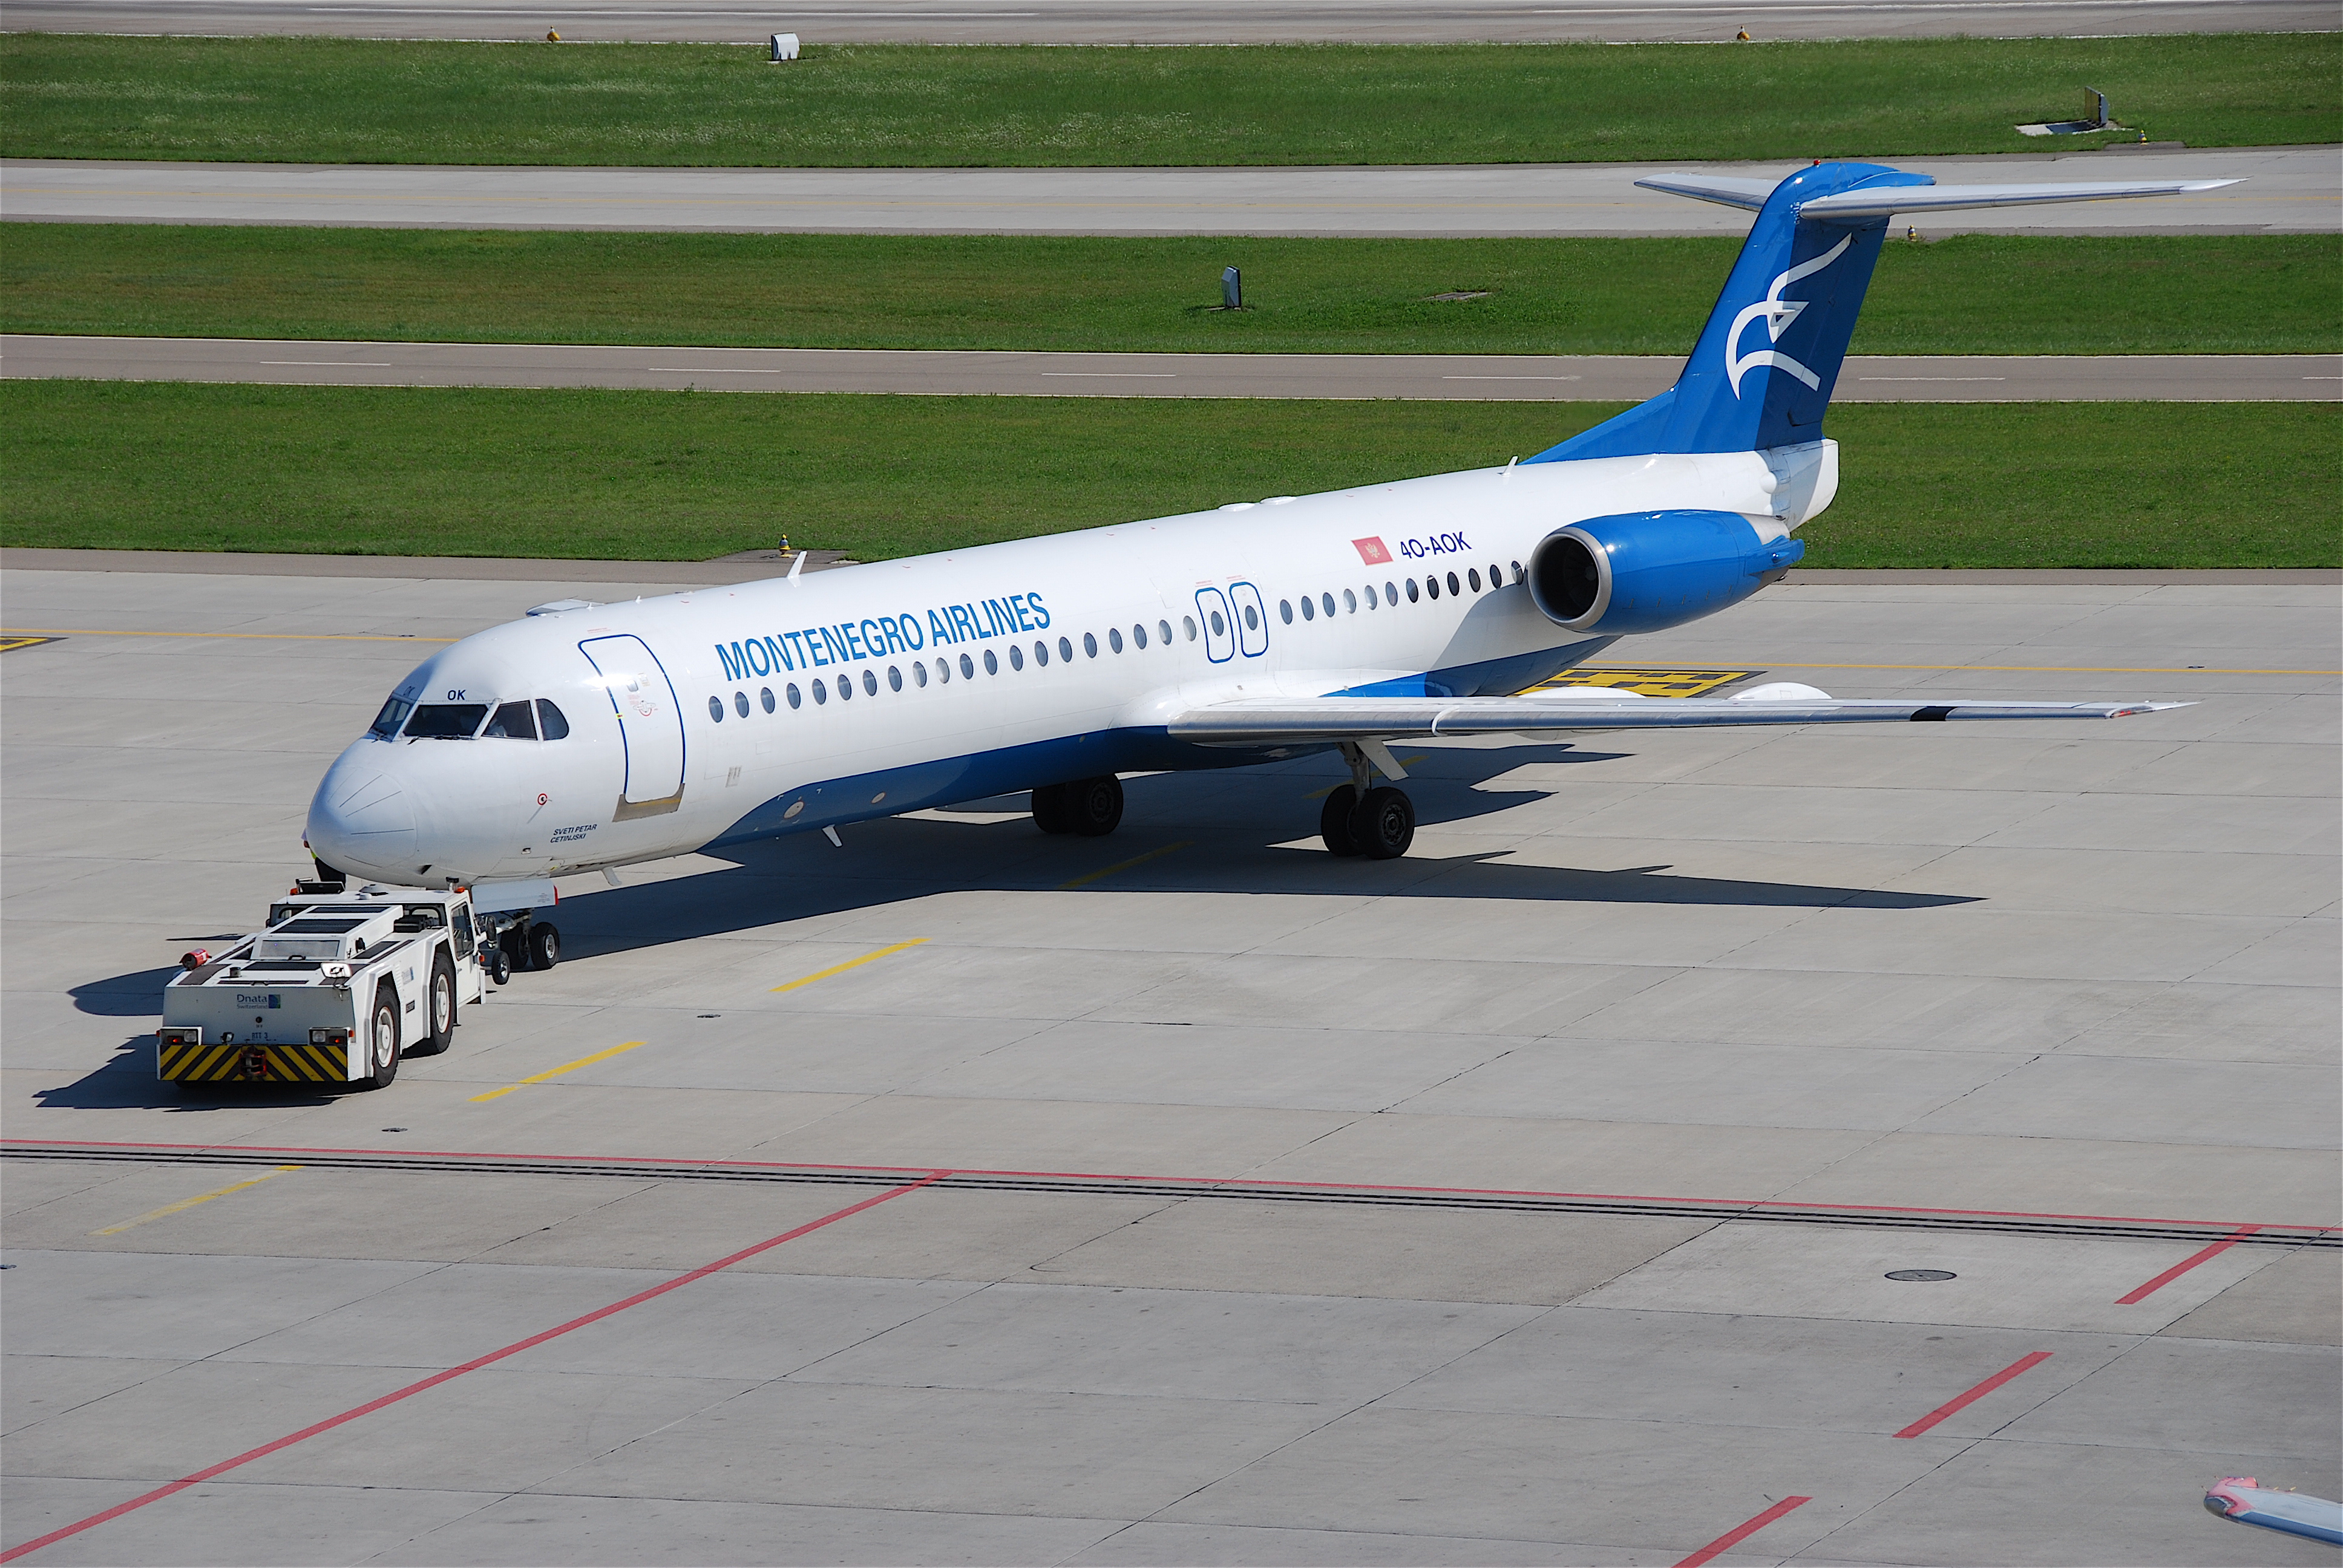 Montenegro Airlines Fokker 100, 4O-AOK@ZRH,04.08.2009-549dn - Flickr - Aero Icarus